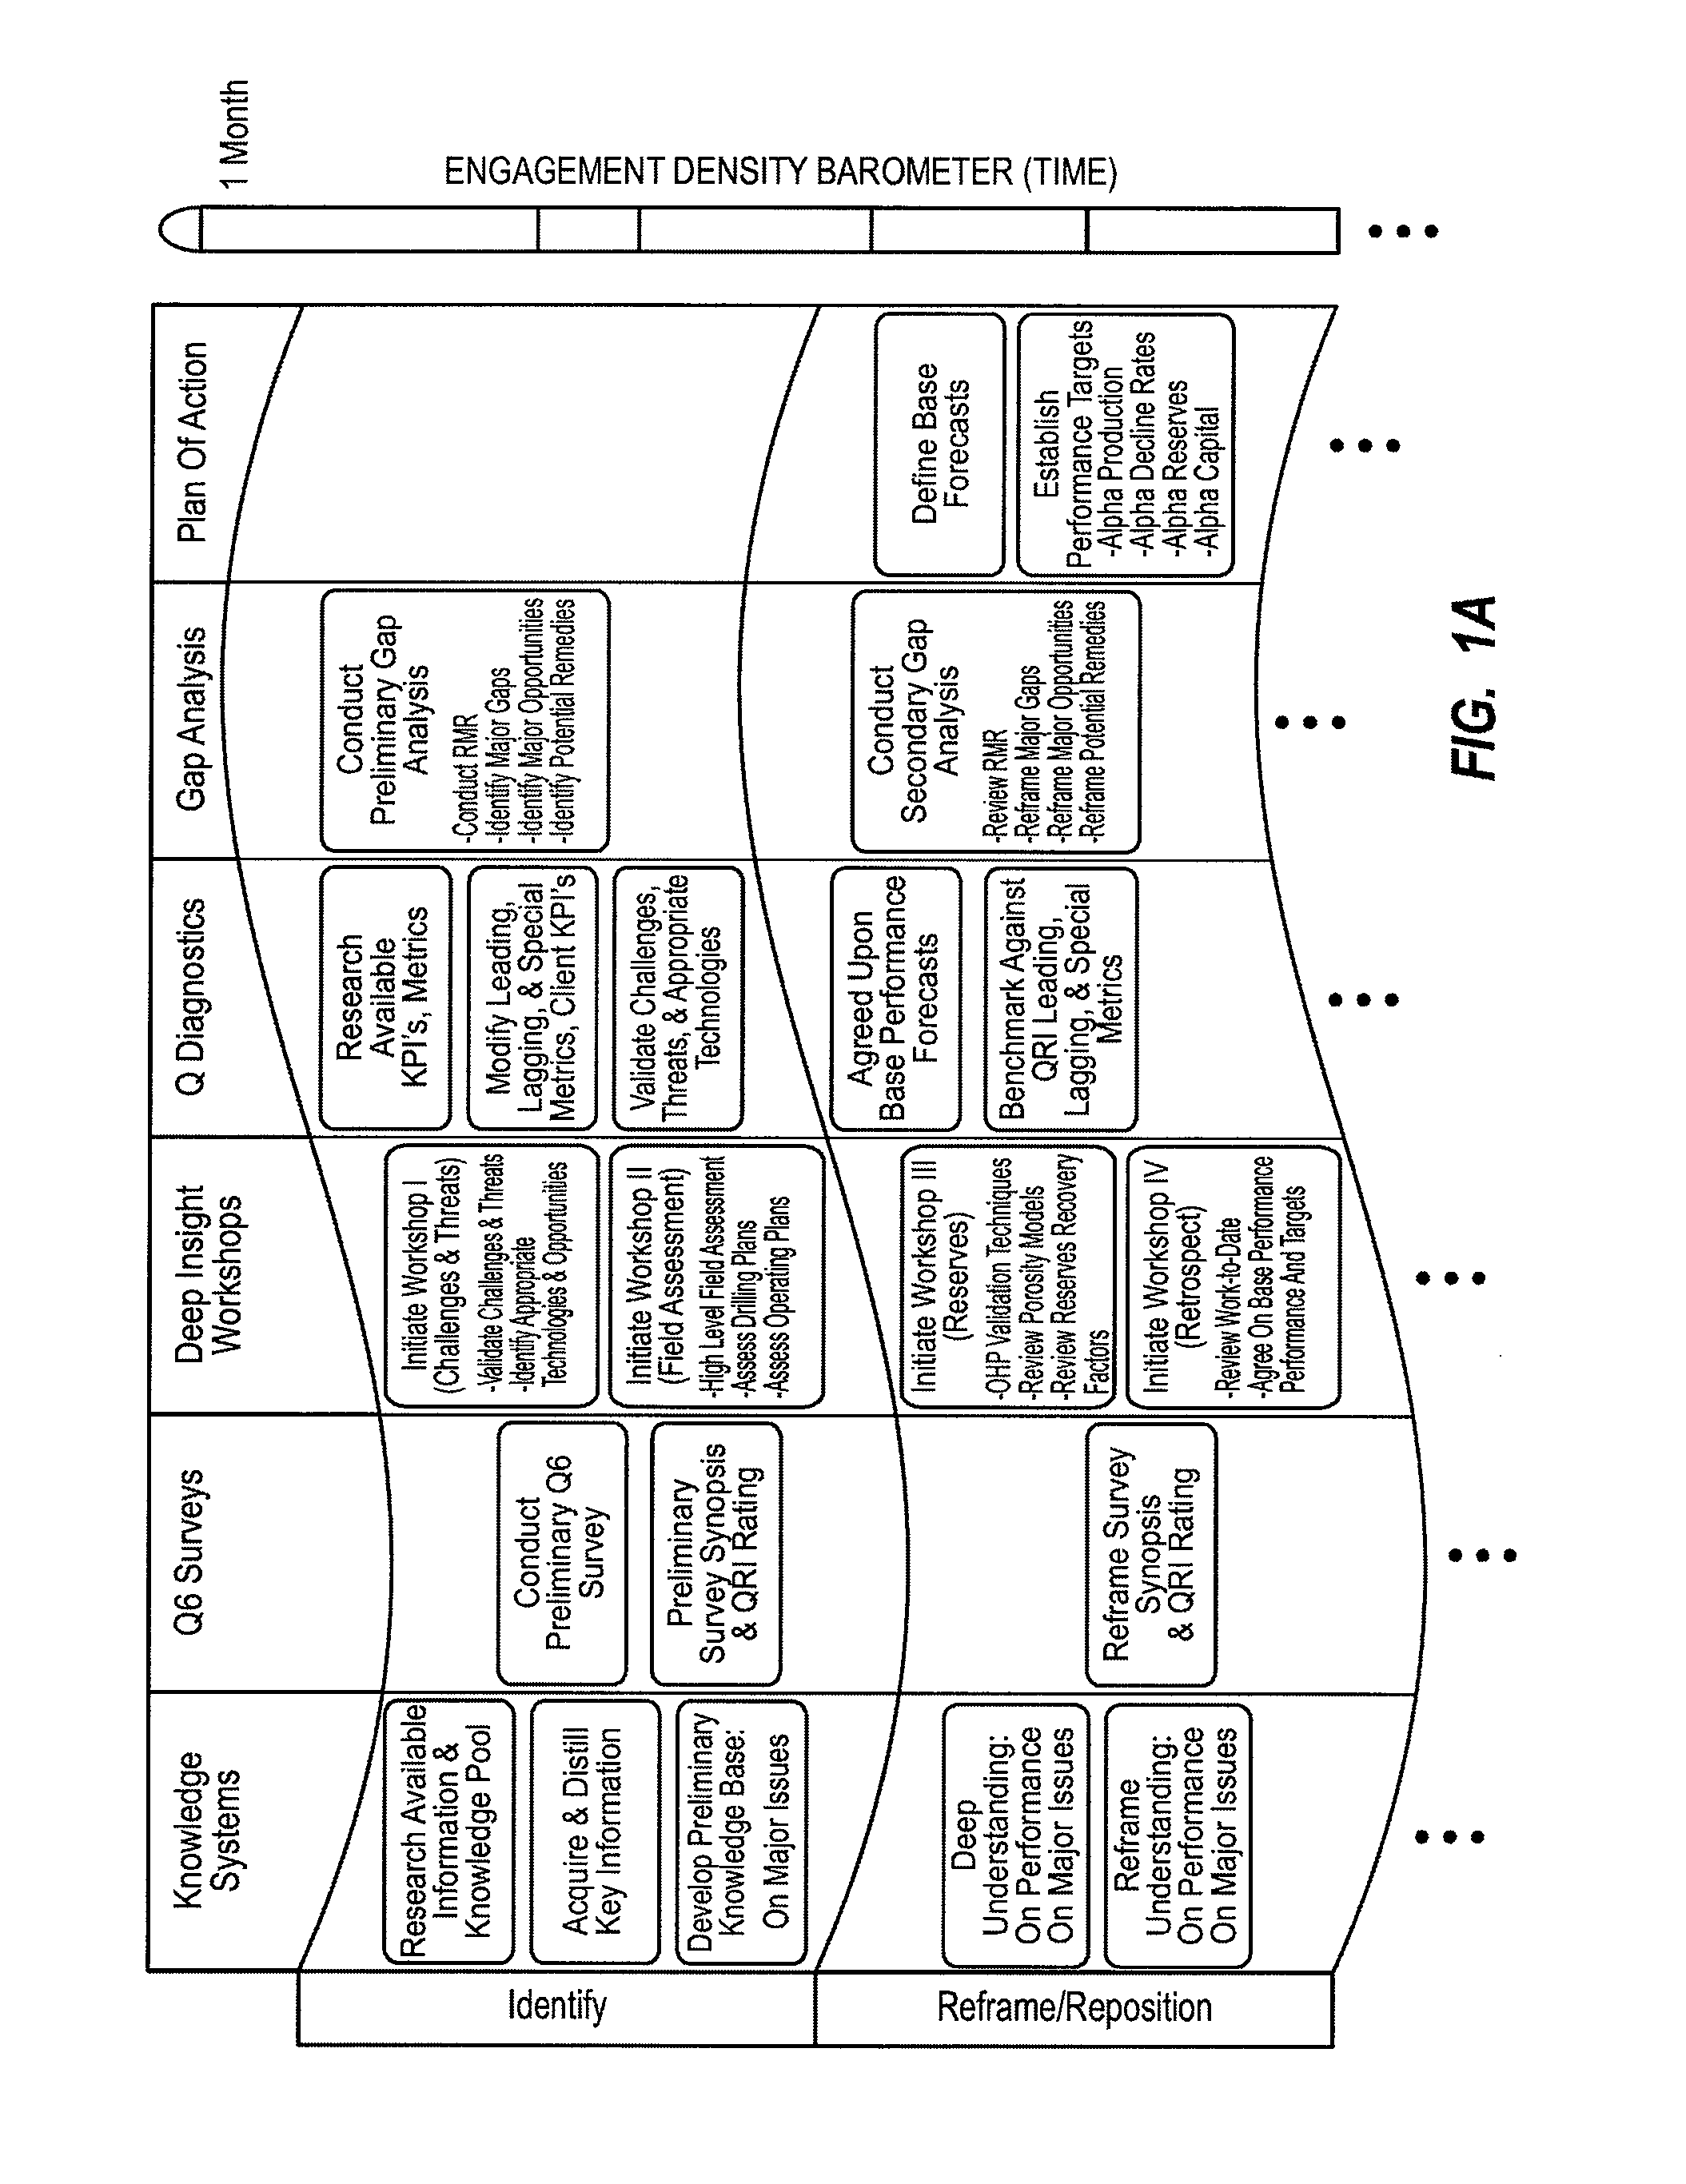 Method for dynamically assessing petroleum reservoir competency and increasing production and recovery through asymmetric analysis of performance metrics